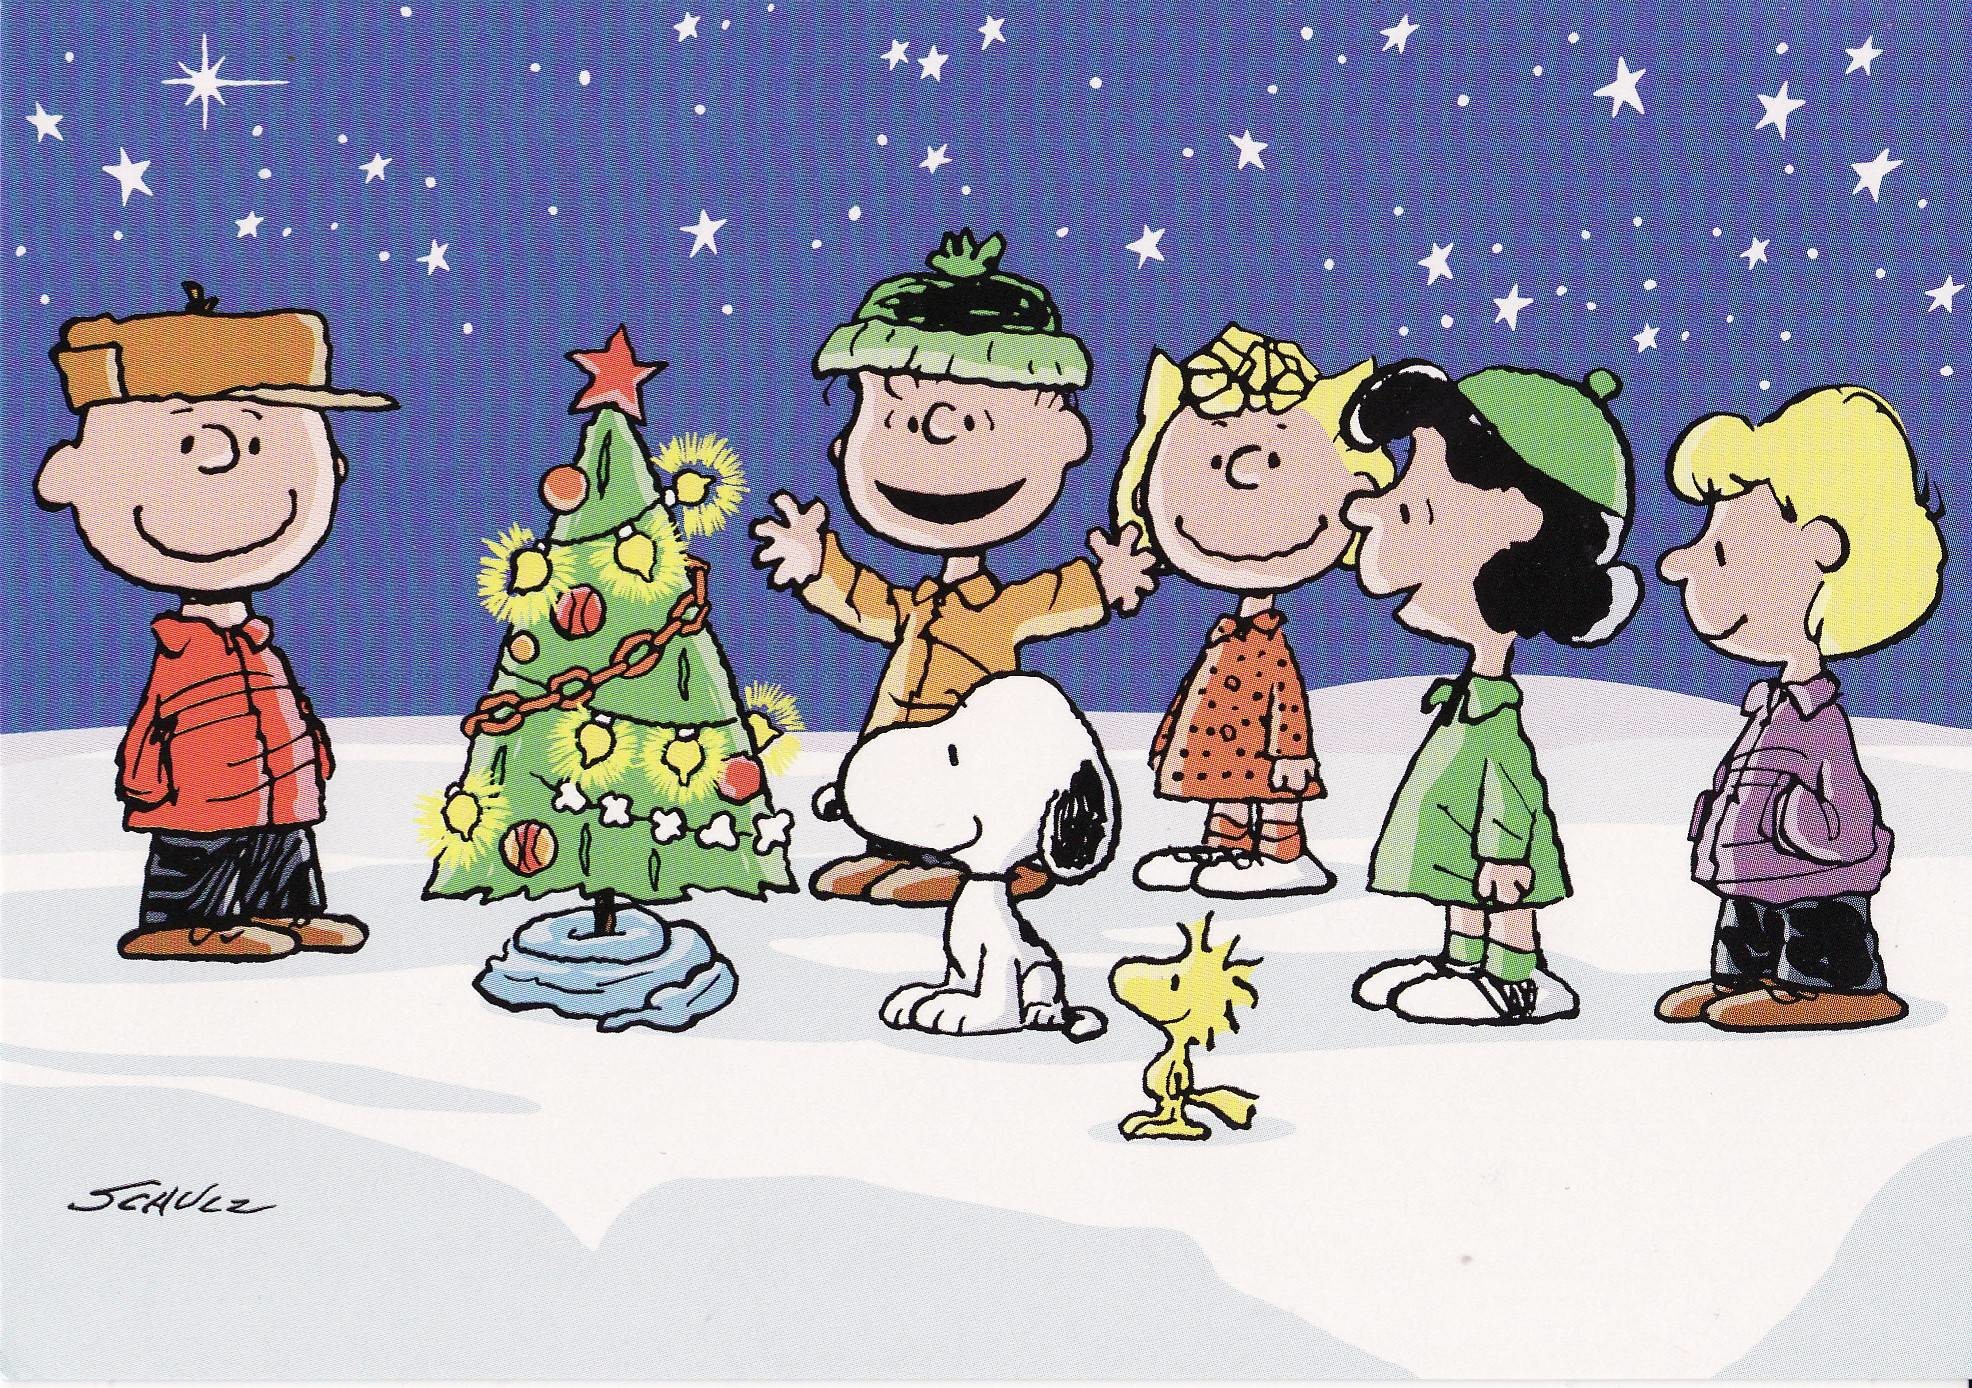 Snoopy Christmas Wallpaper for Computer